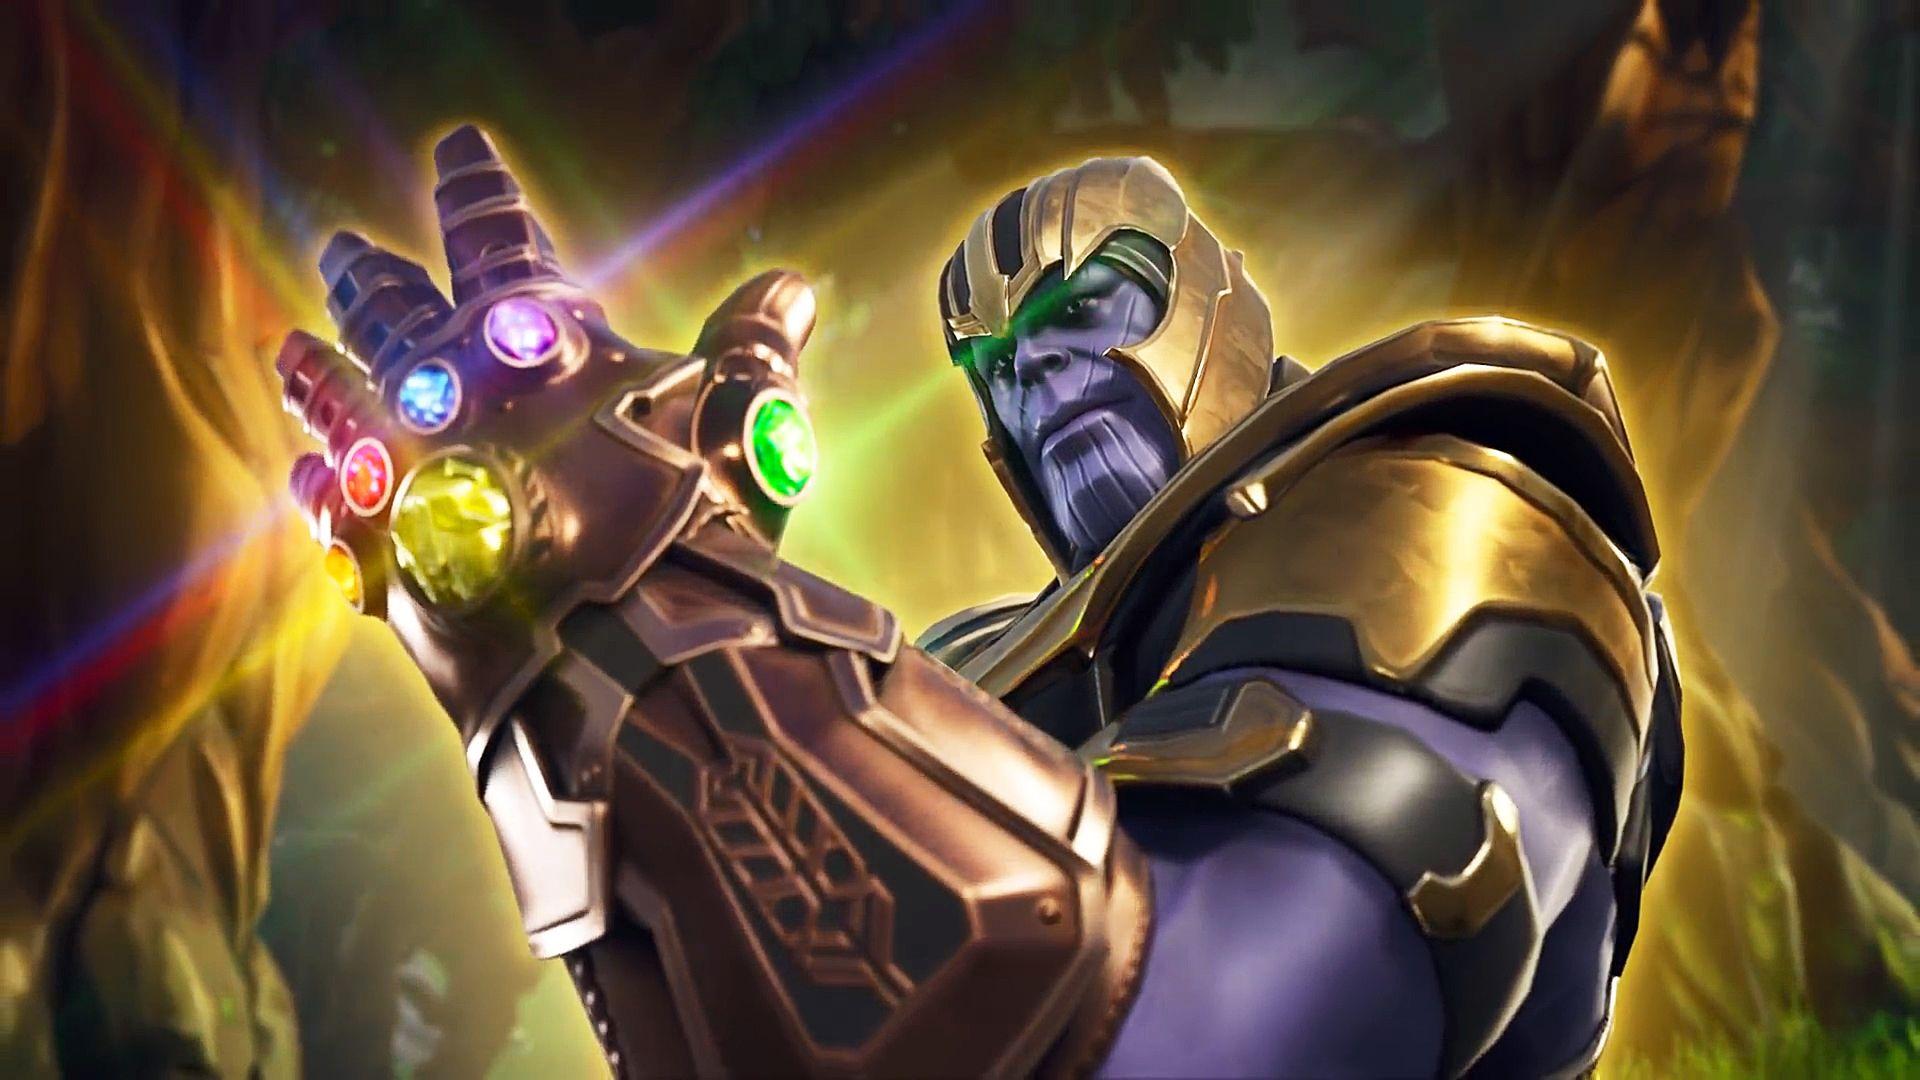 Fortnite's Thanos Mode, Infinity Gauntlet Mashup, Is Live